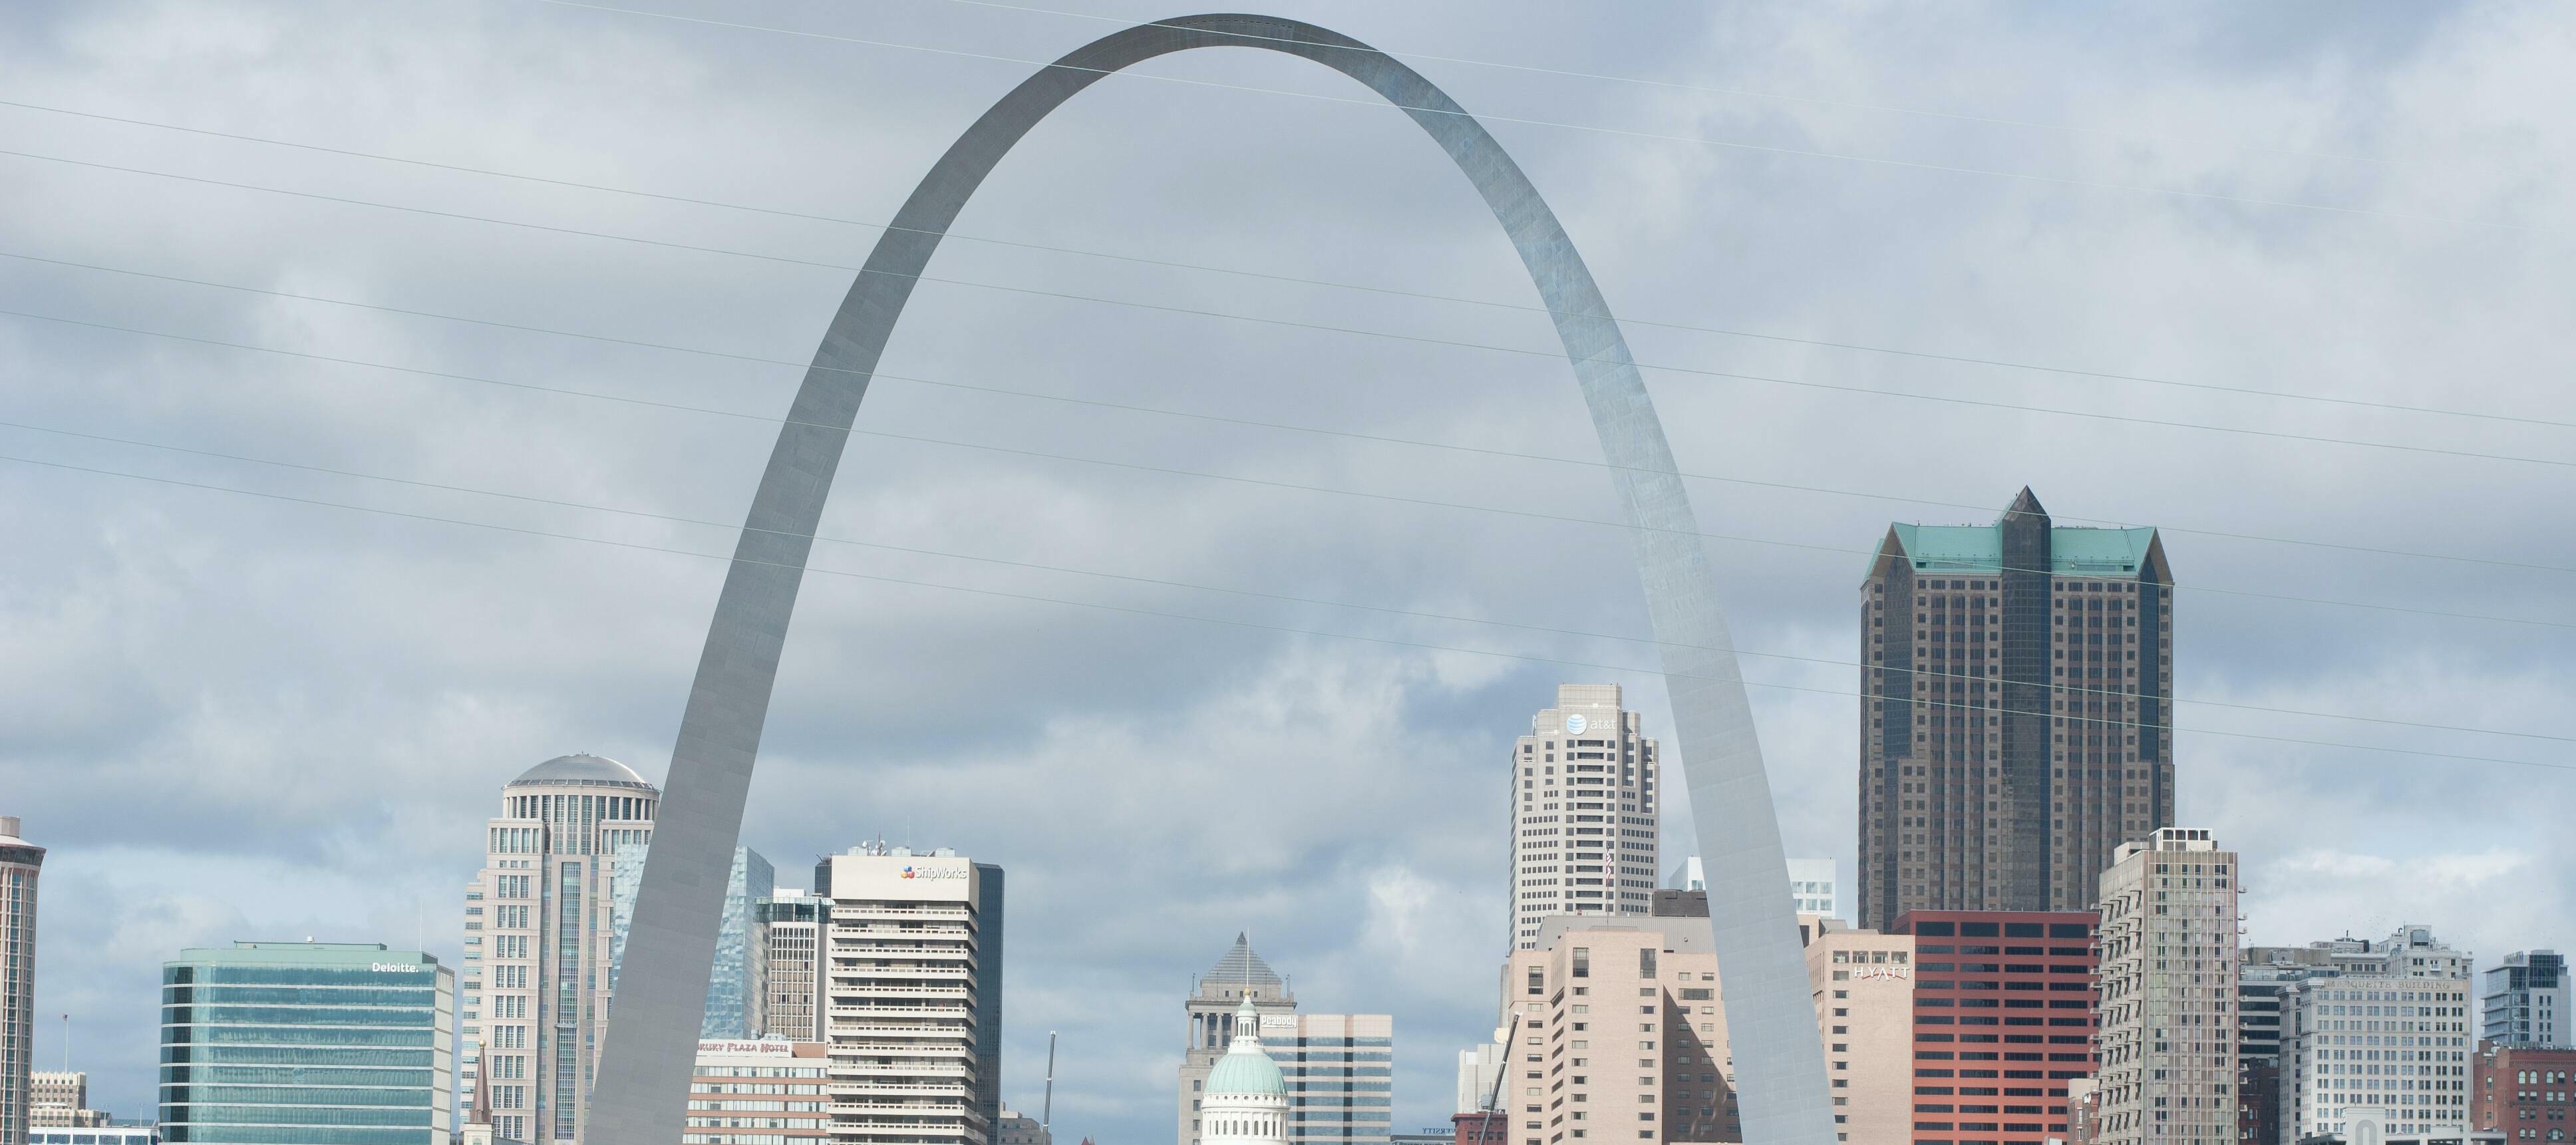 Join us in St. Louis for Advanced Admin Training Feb. 21 - 23!